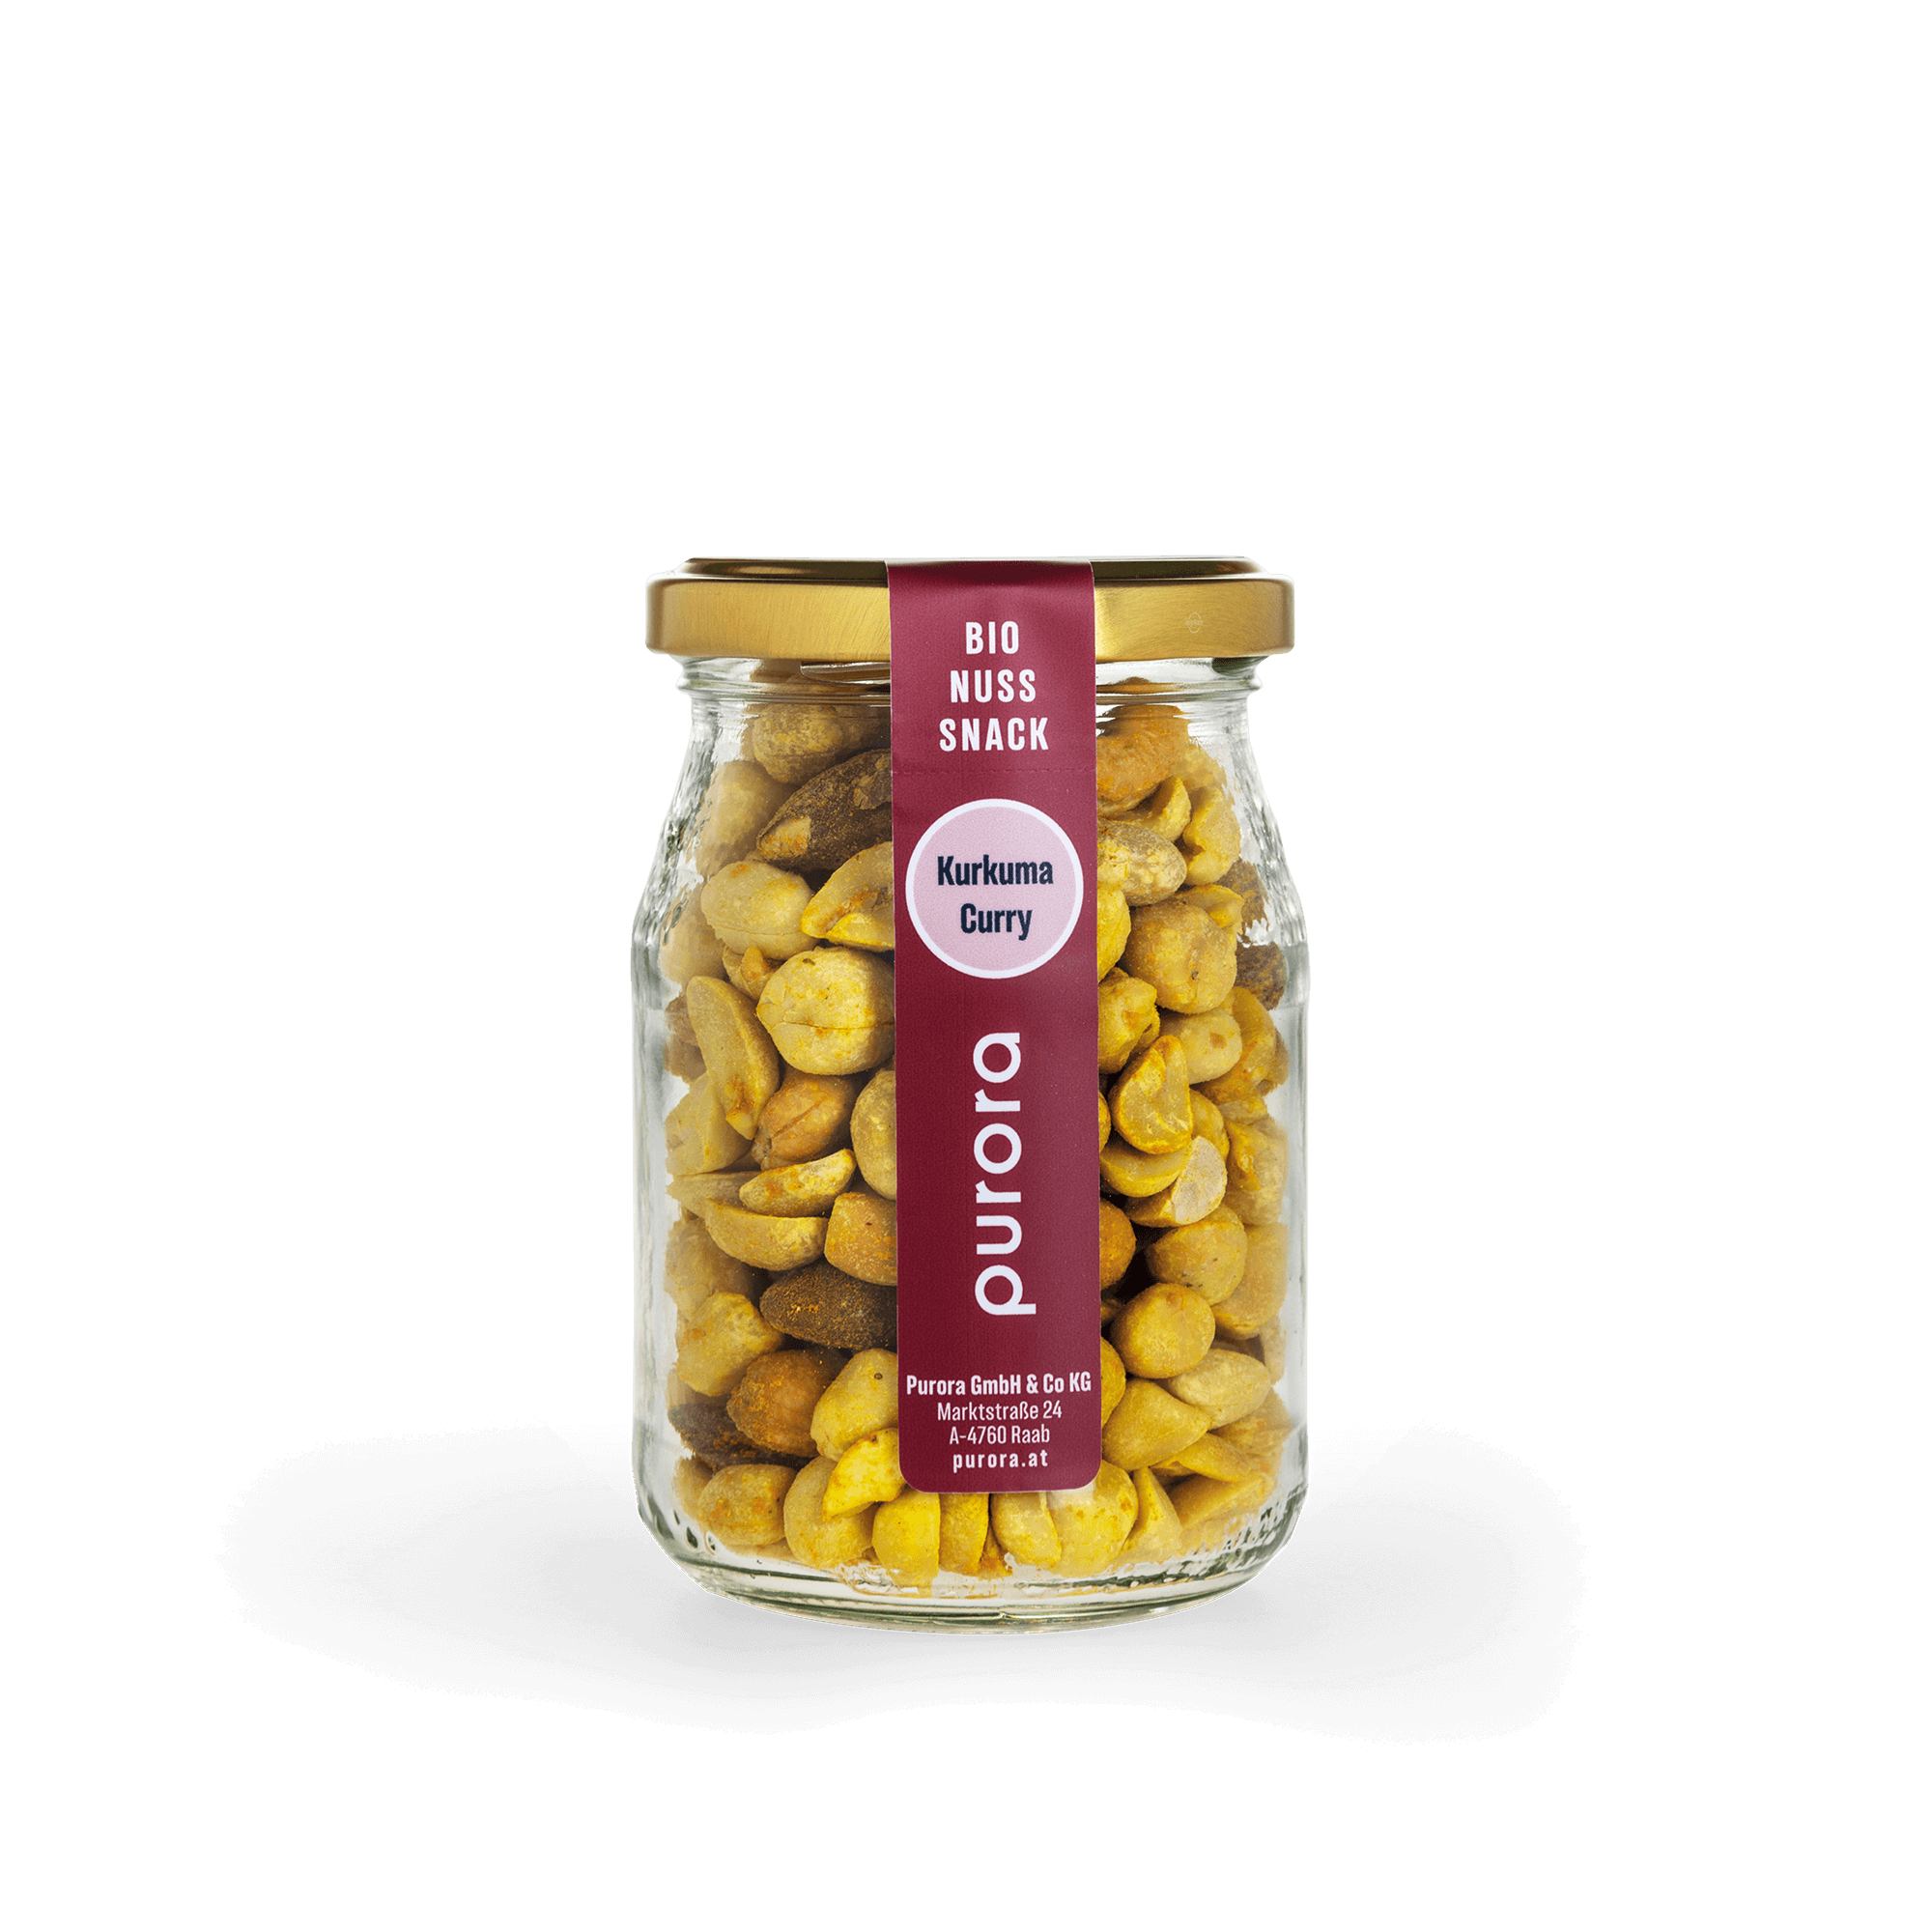 Nut snack | Turmeric, curry, lovage 150g